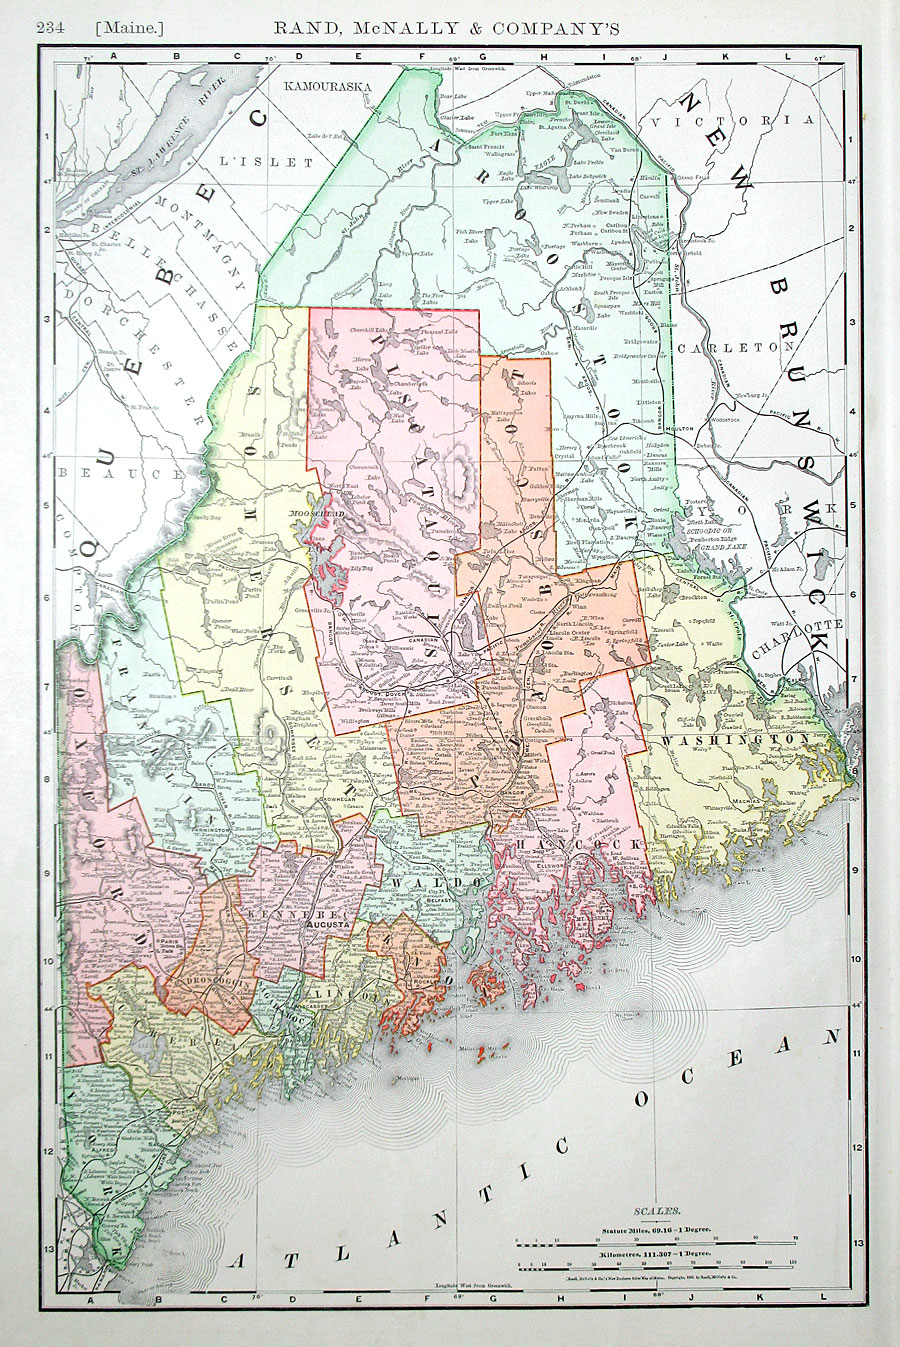 c 1893 Rand, McNally & Co Map of Maine